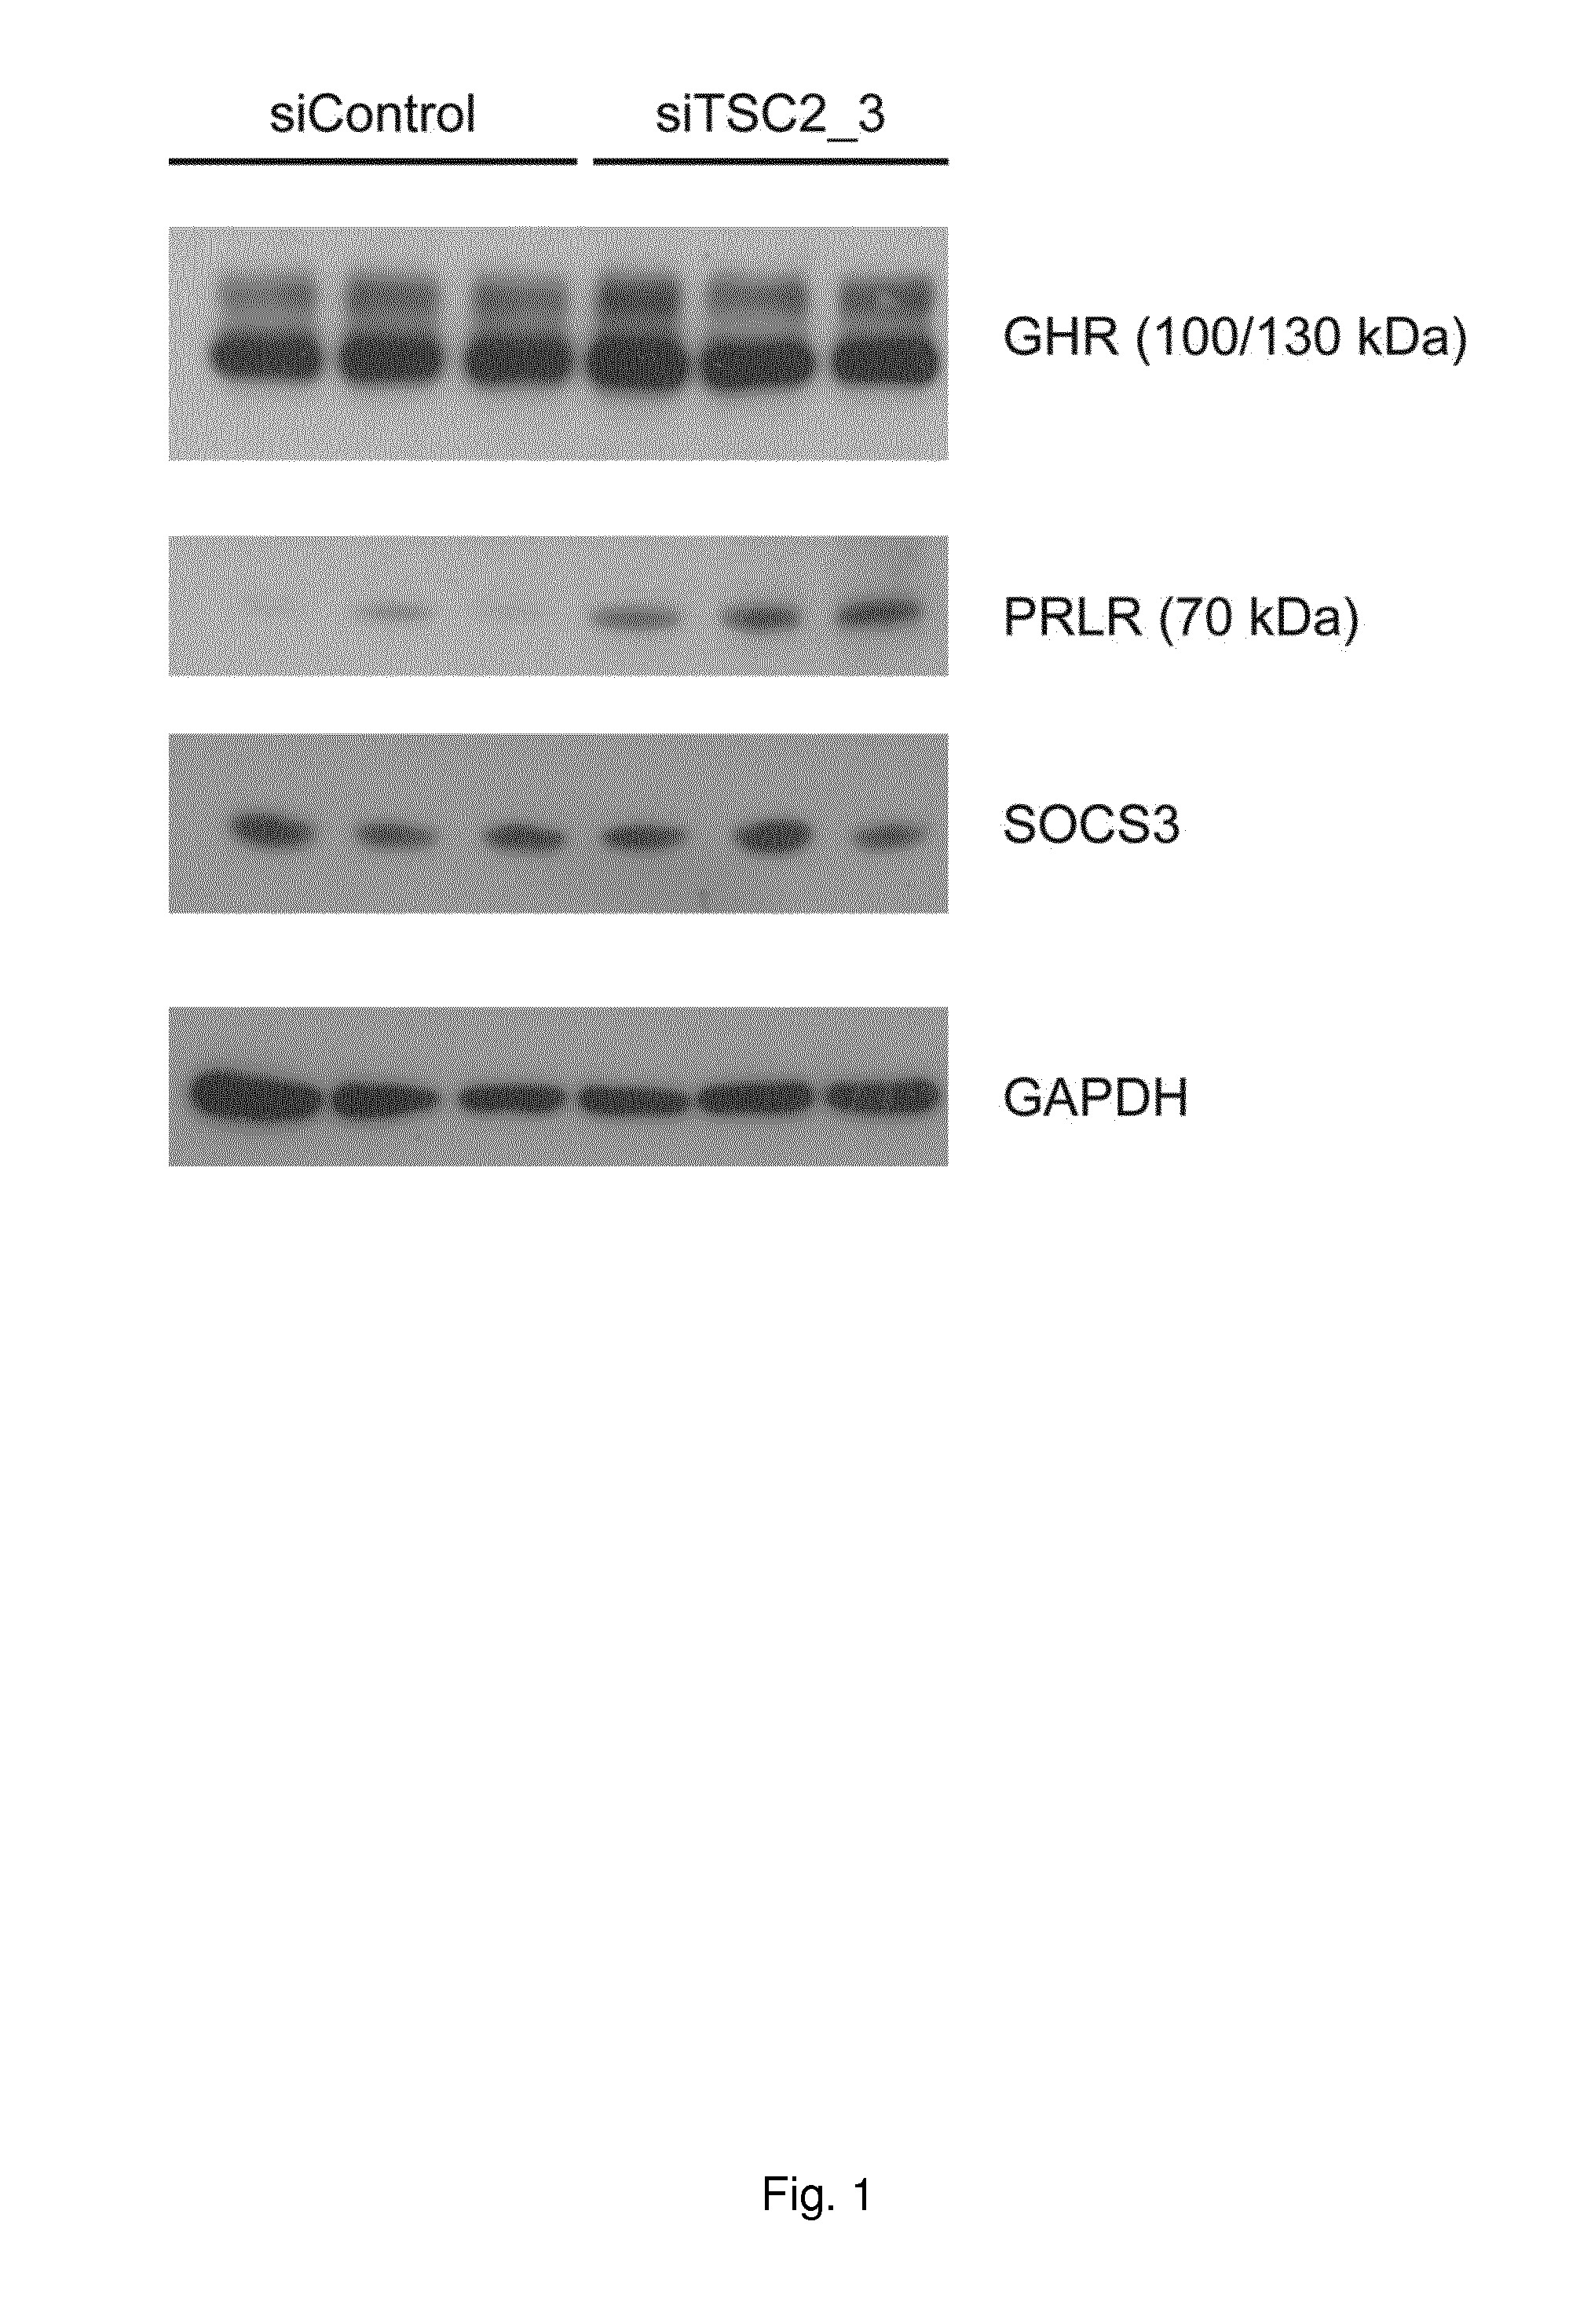 Method for diagnosis and treatment of prolactin associated disorders